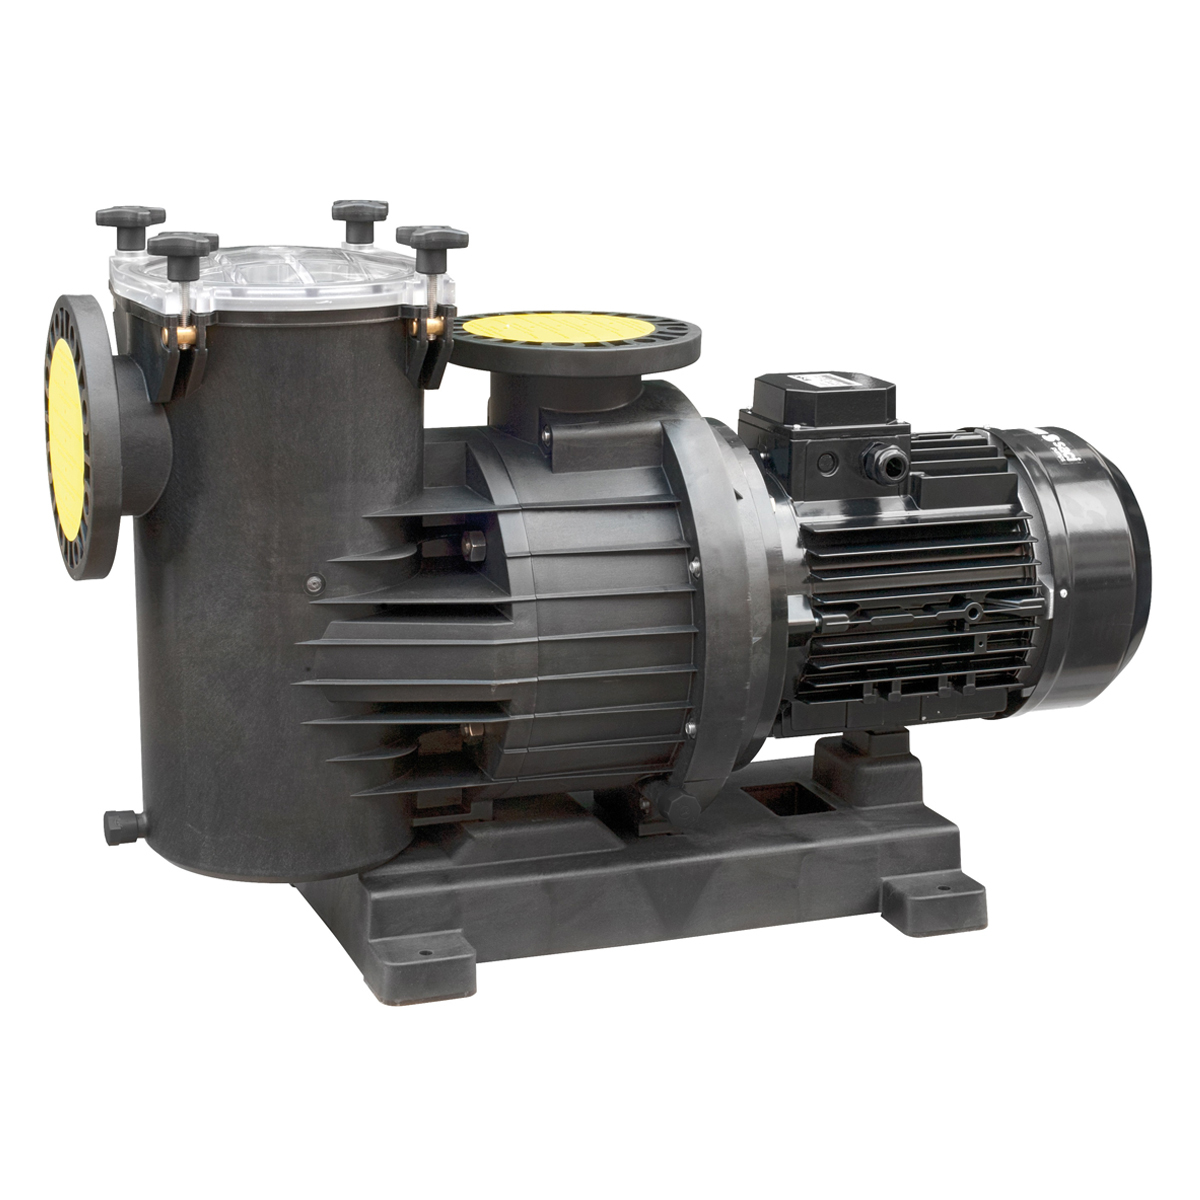 Smart Power Filter Pump 1250 400-690V, 2850 rpm 9,2 kW, 12,5 HP, 152 m³/h at 10m Smart Power Filter Pump 1250 400-690V, 2850 rpm 9,2 kW, 12,5 HP, 152 m³/h at 10m